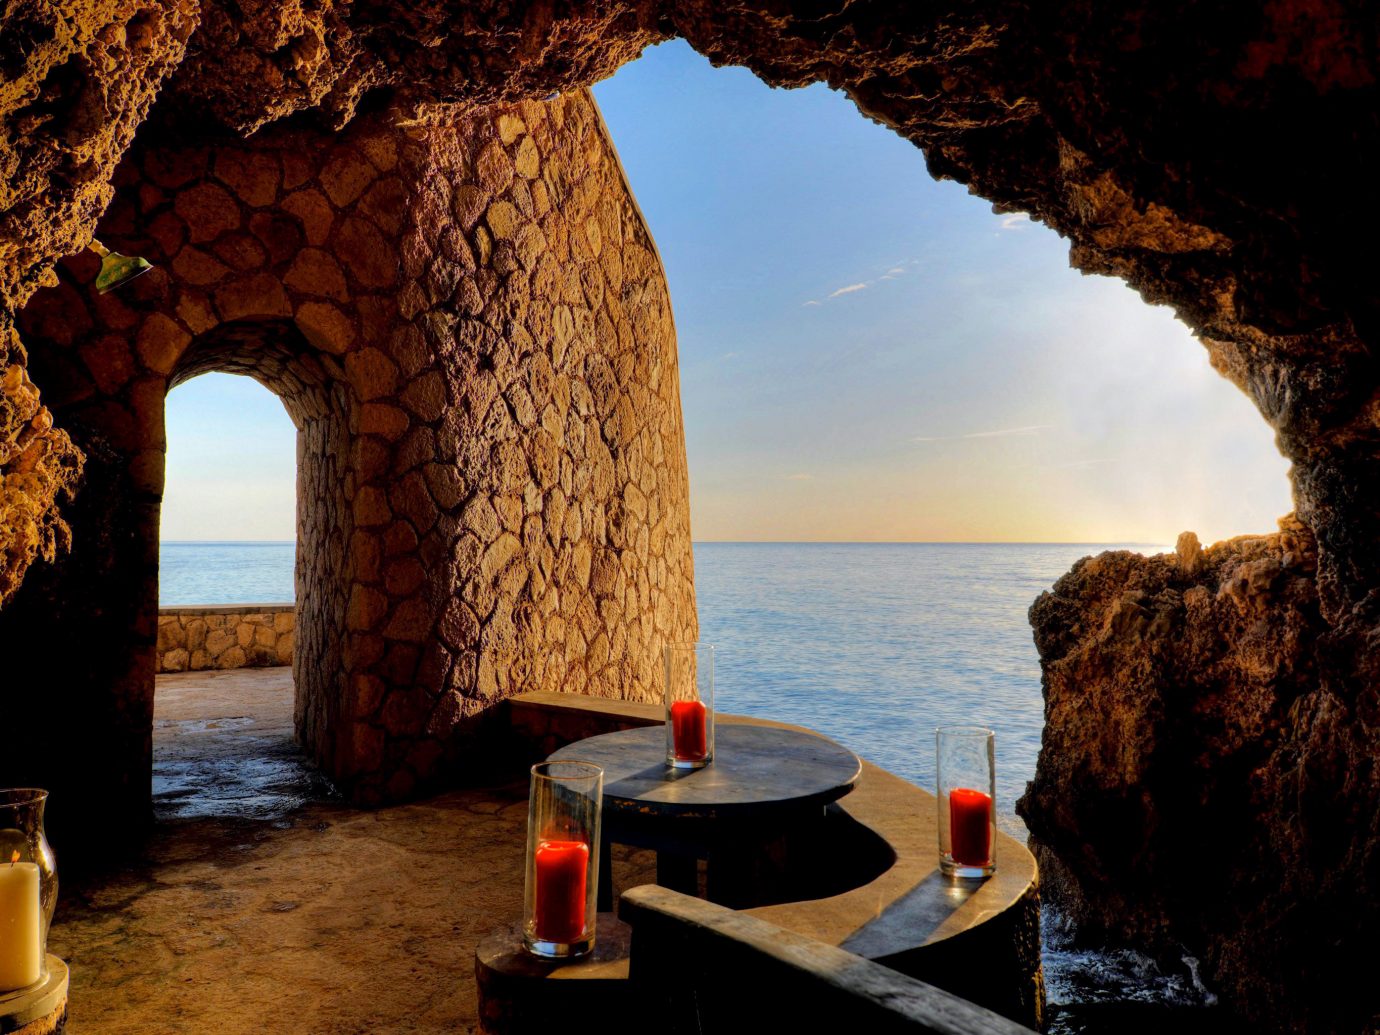 Dining Drink Eat Hotels Luxury Romance Romantic Scenic views Trip Ideas Tropical Waterfront water outdoor building mountain arch Sea evening overlooking formation